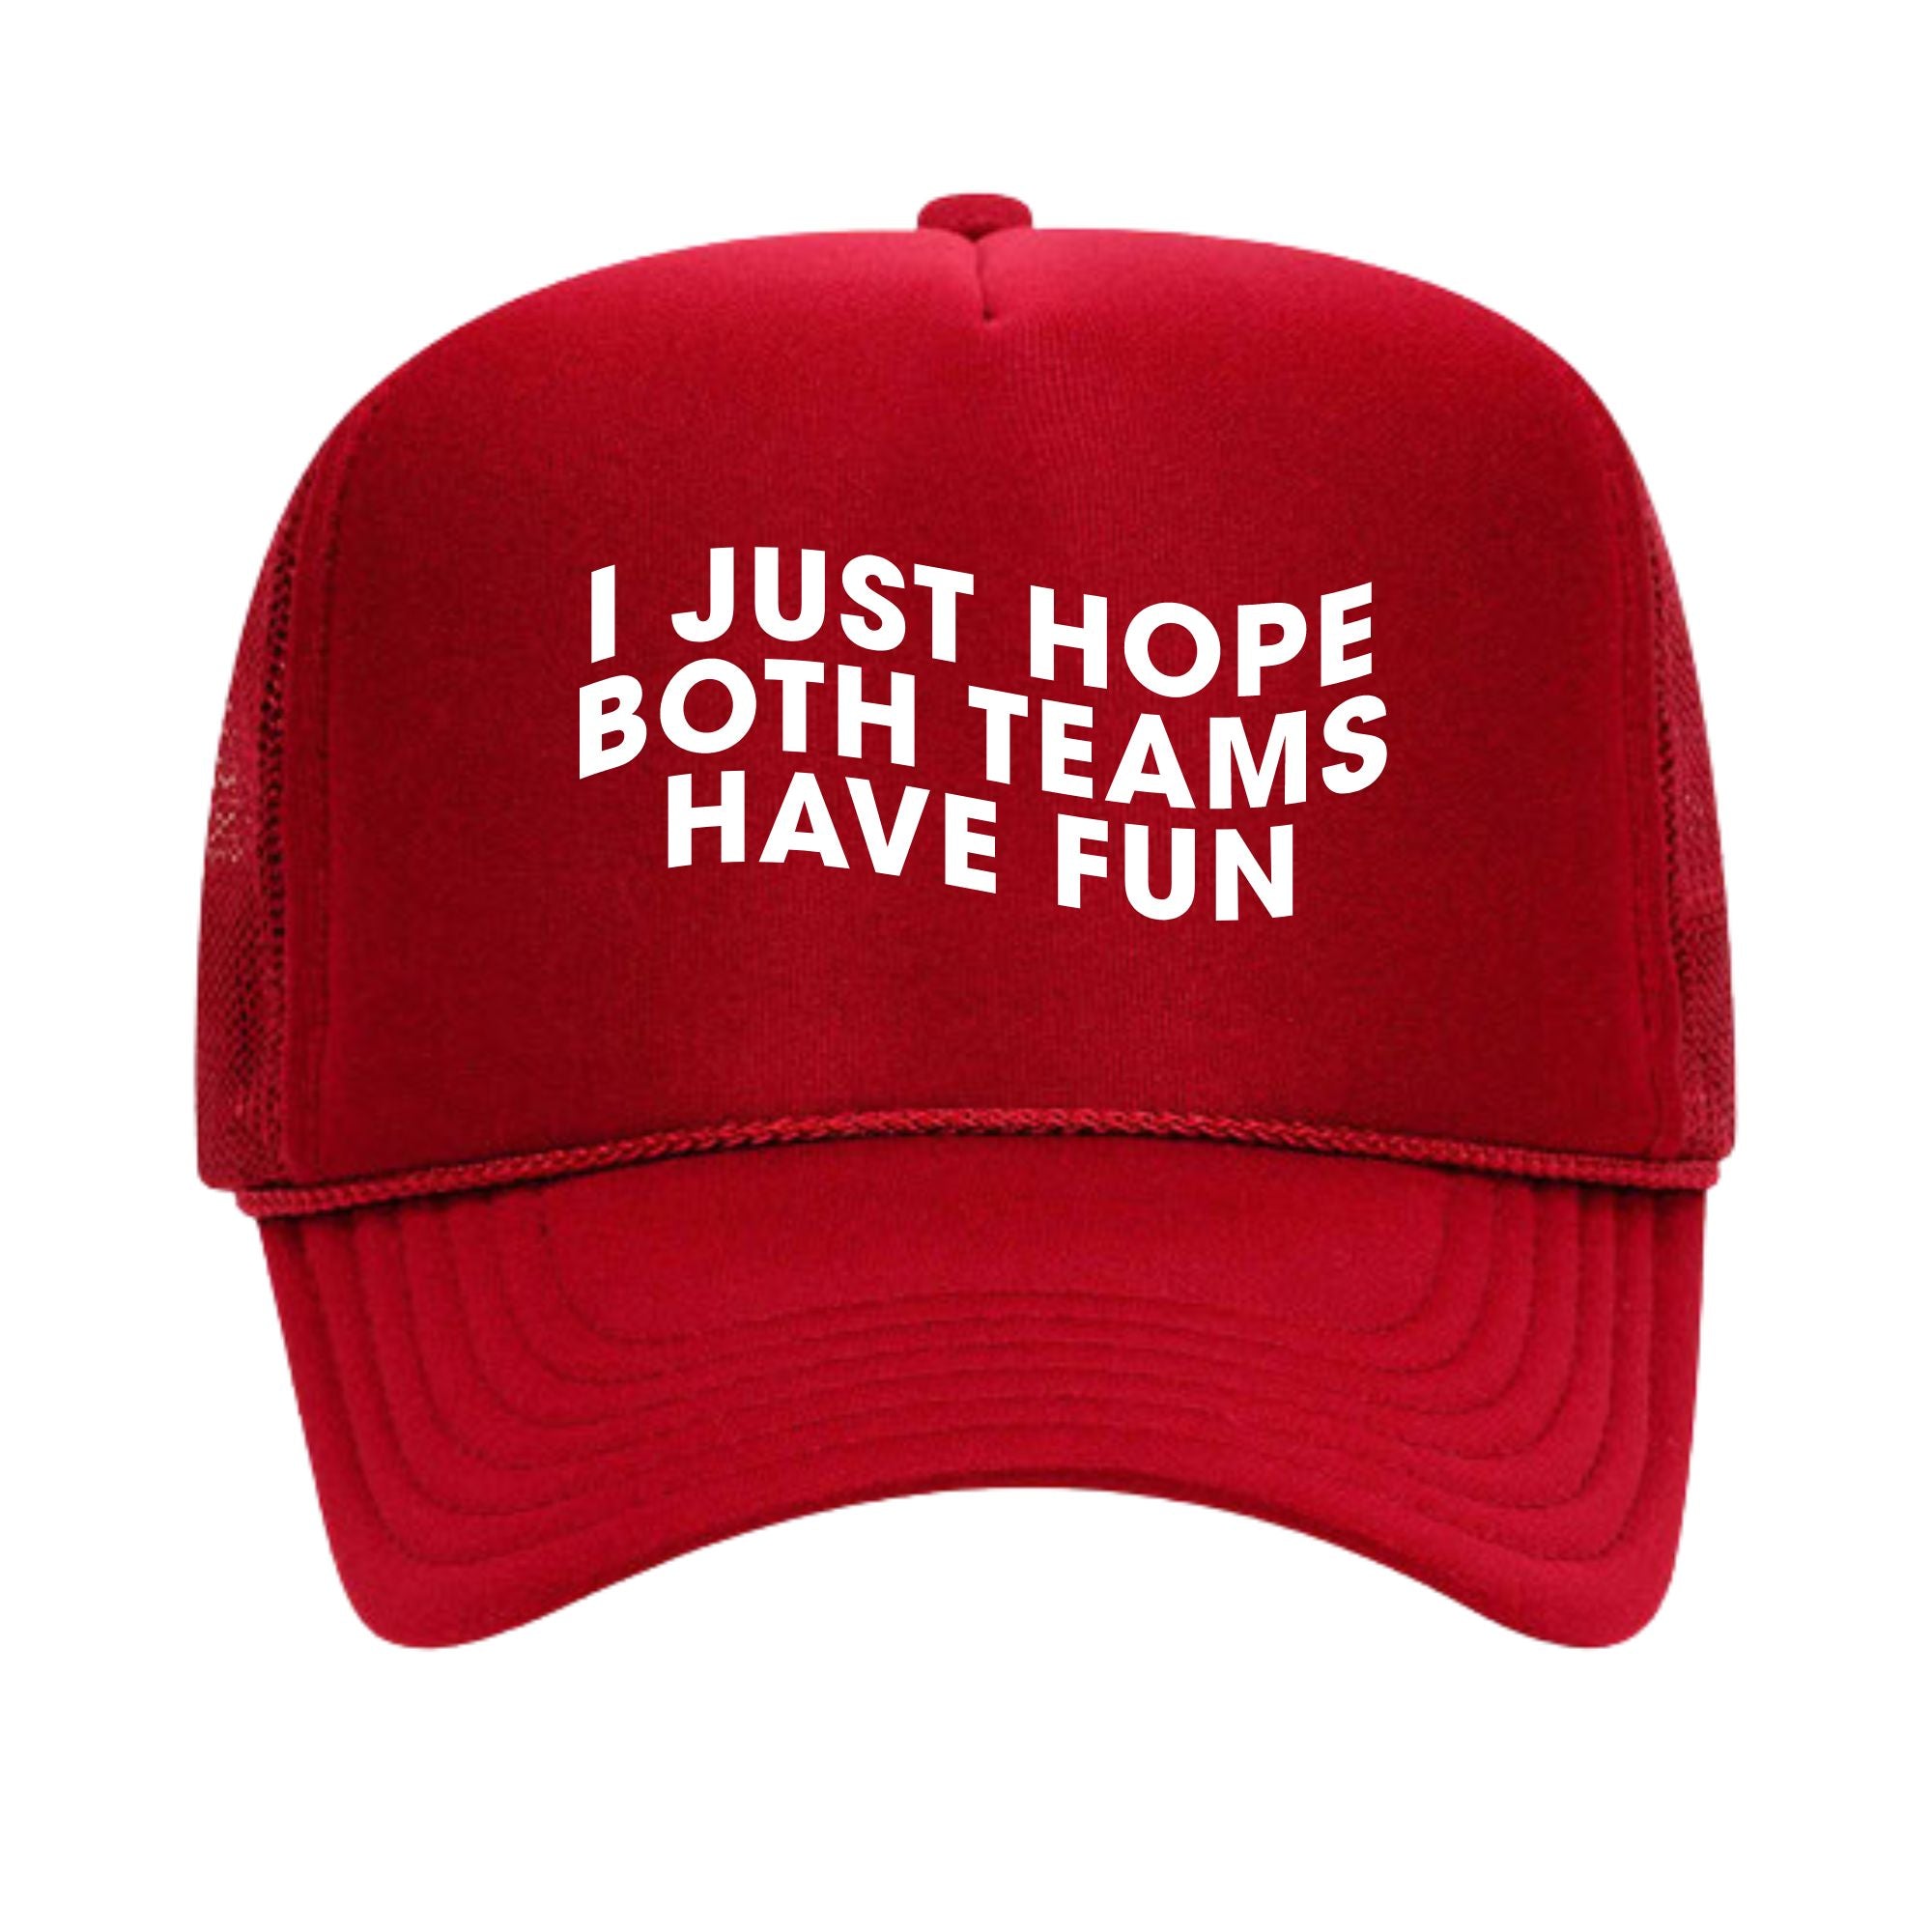 A red trucker hat from our gameday collection that reads "I Just Hope Both Teams Have Fun" on a white background.